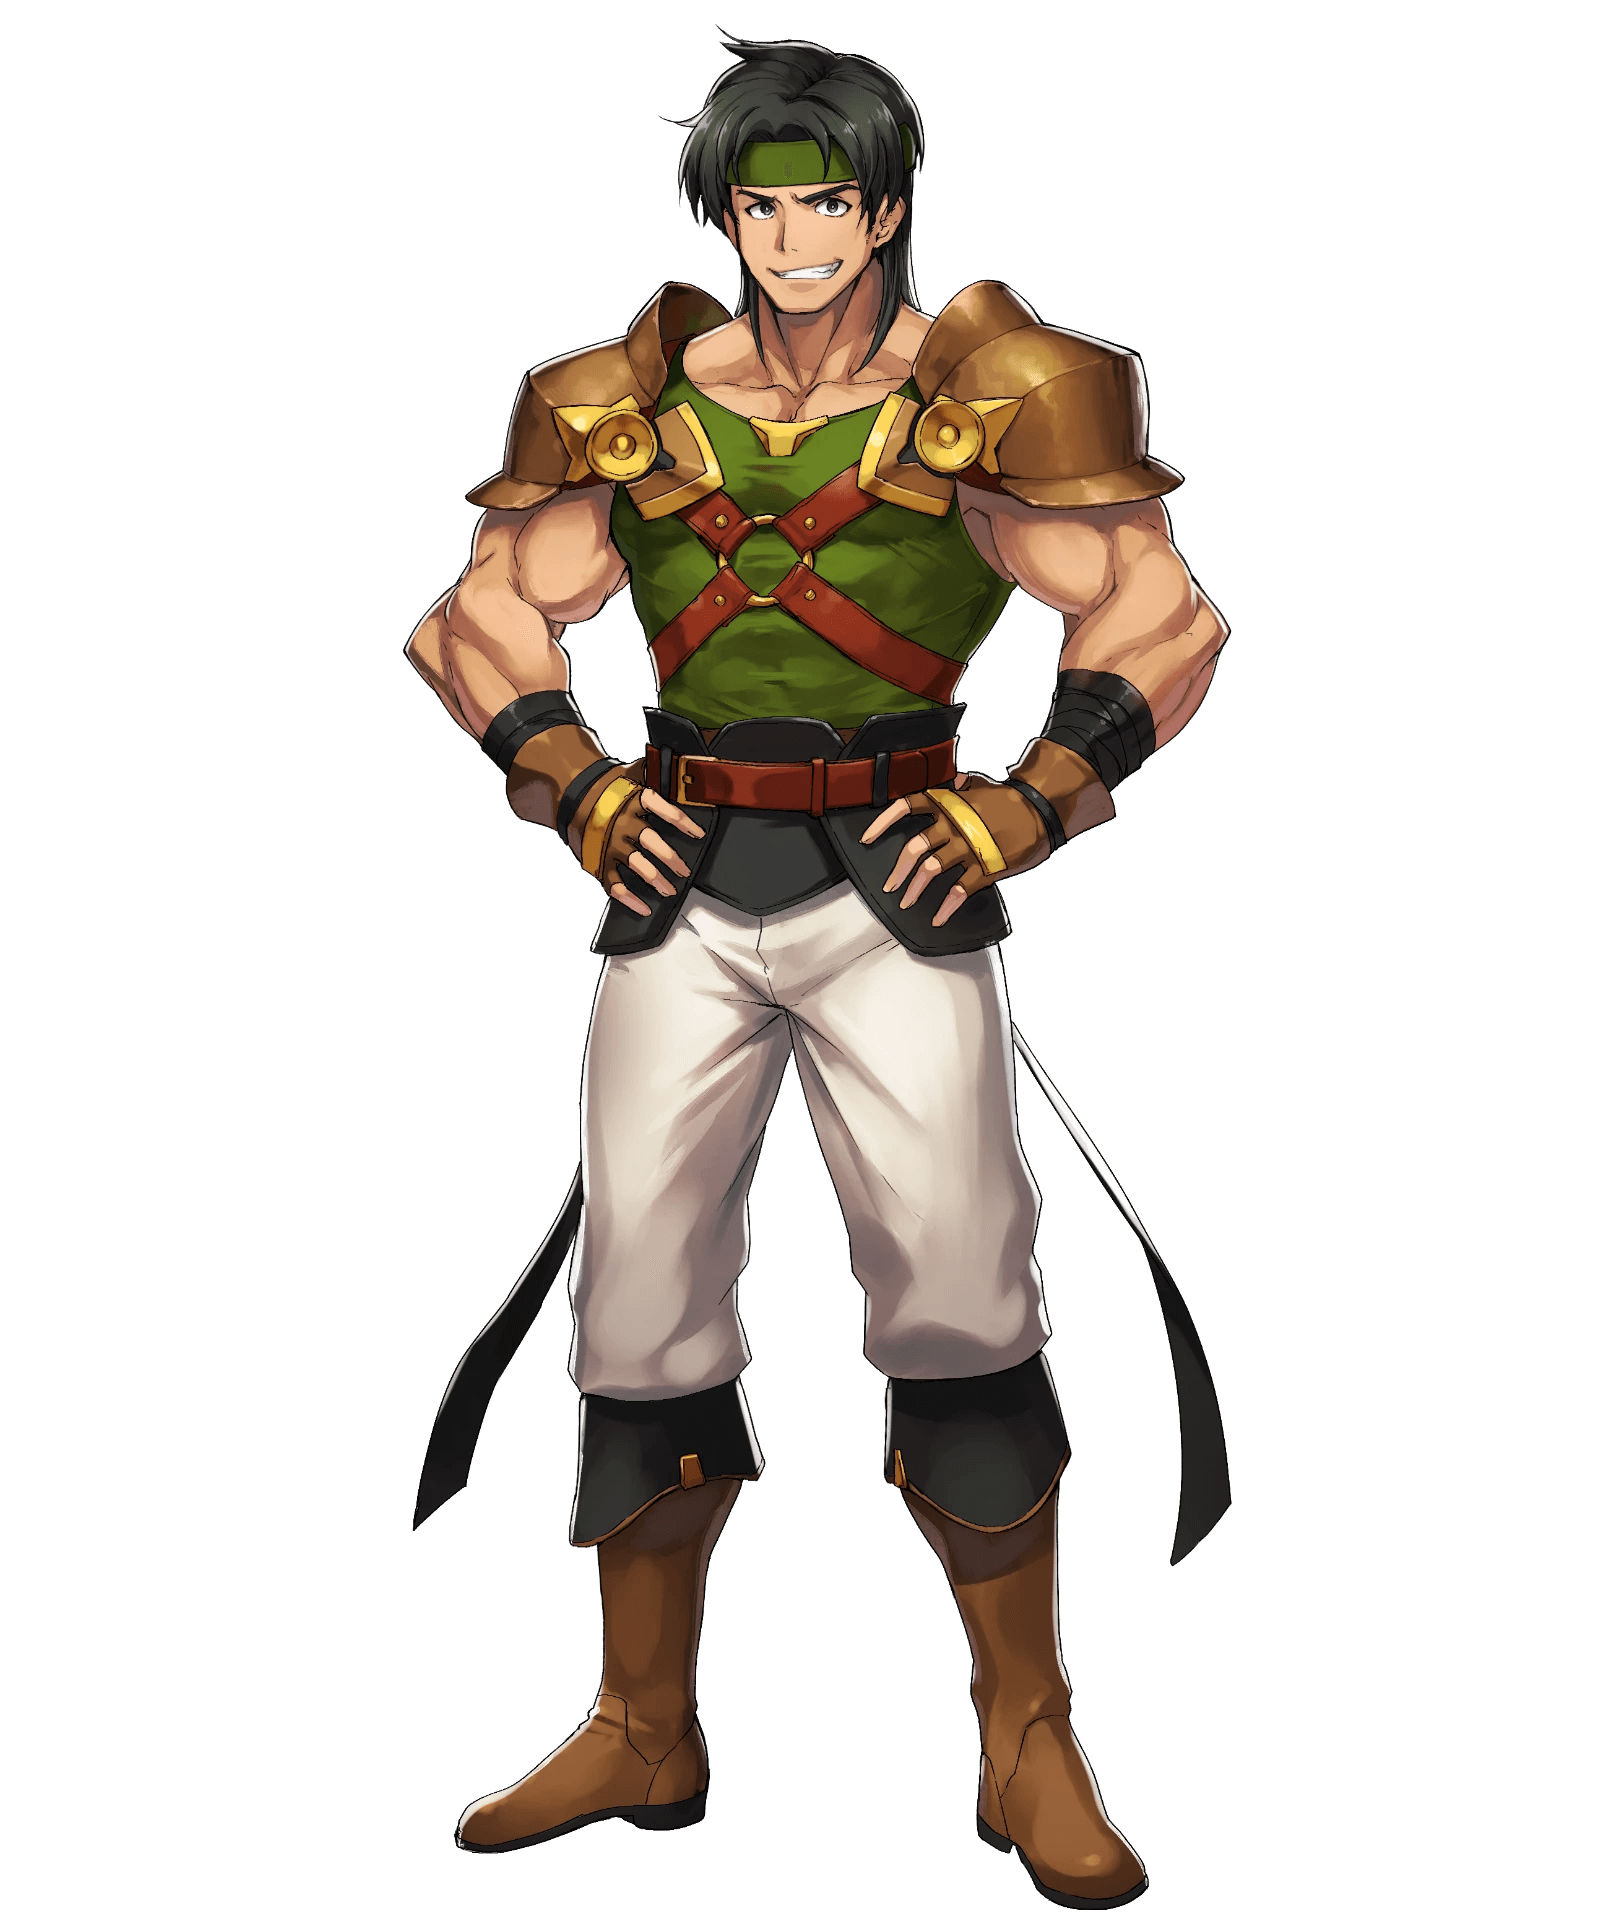 Osian, Scolded Soldier - Fire Emblem: Thracia 776 Minecraft Skin